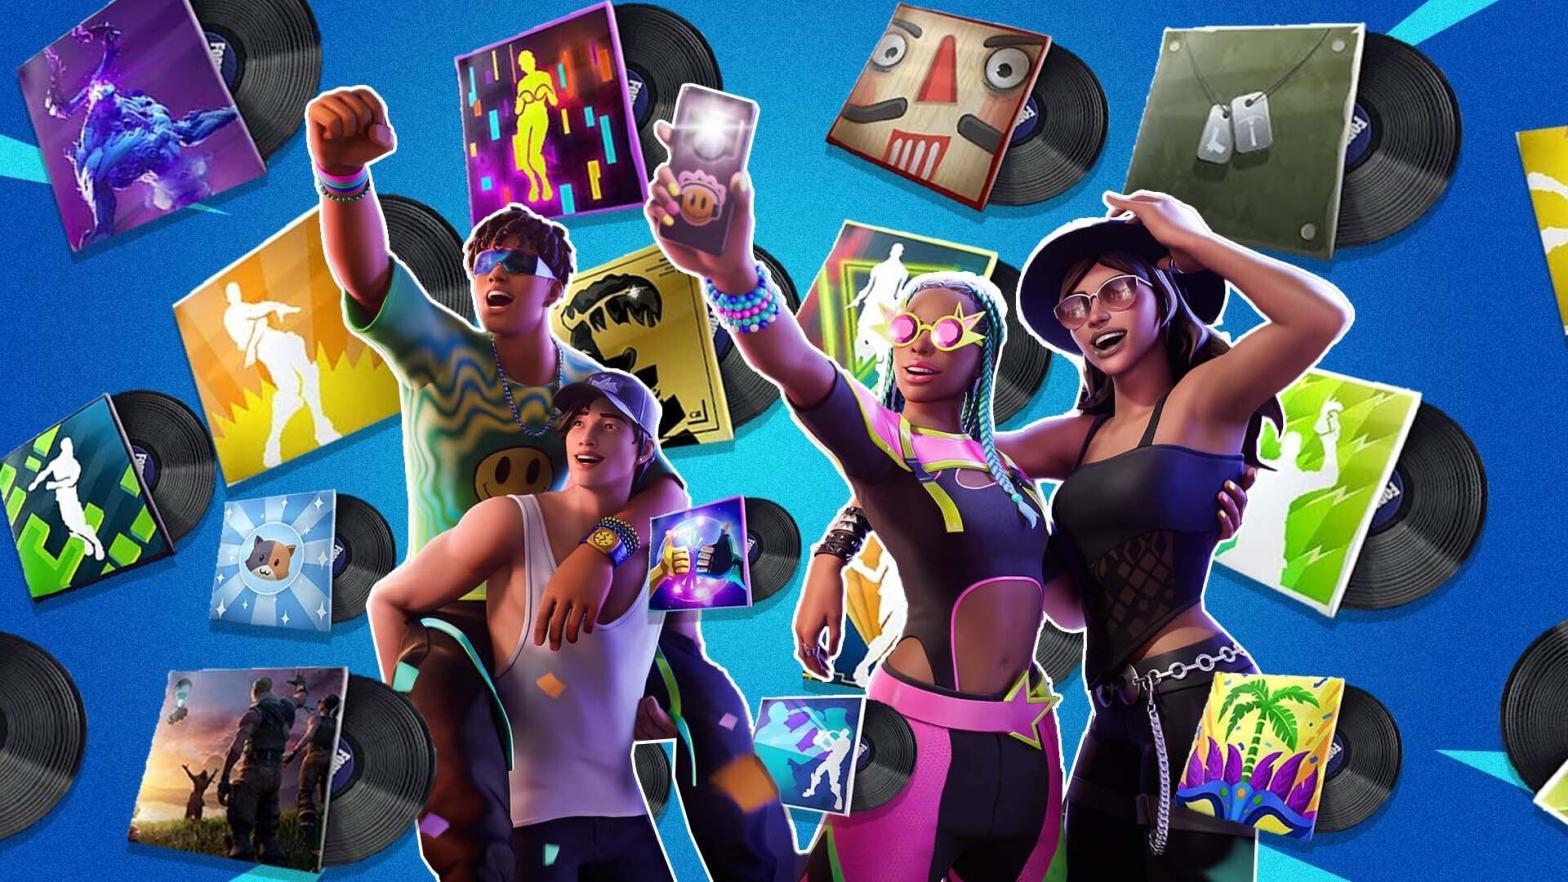 Ranking Fortnite’s Lobby Tracks From Worst To Best